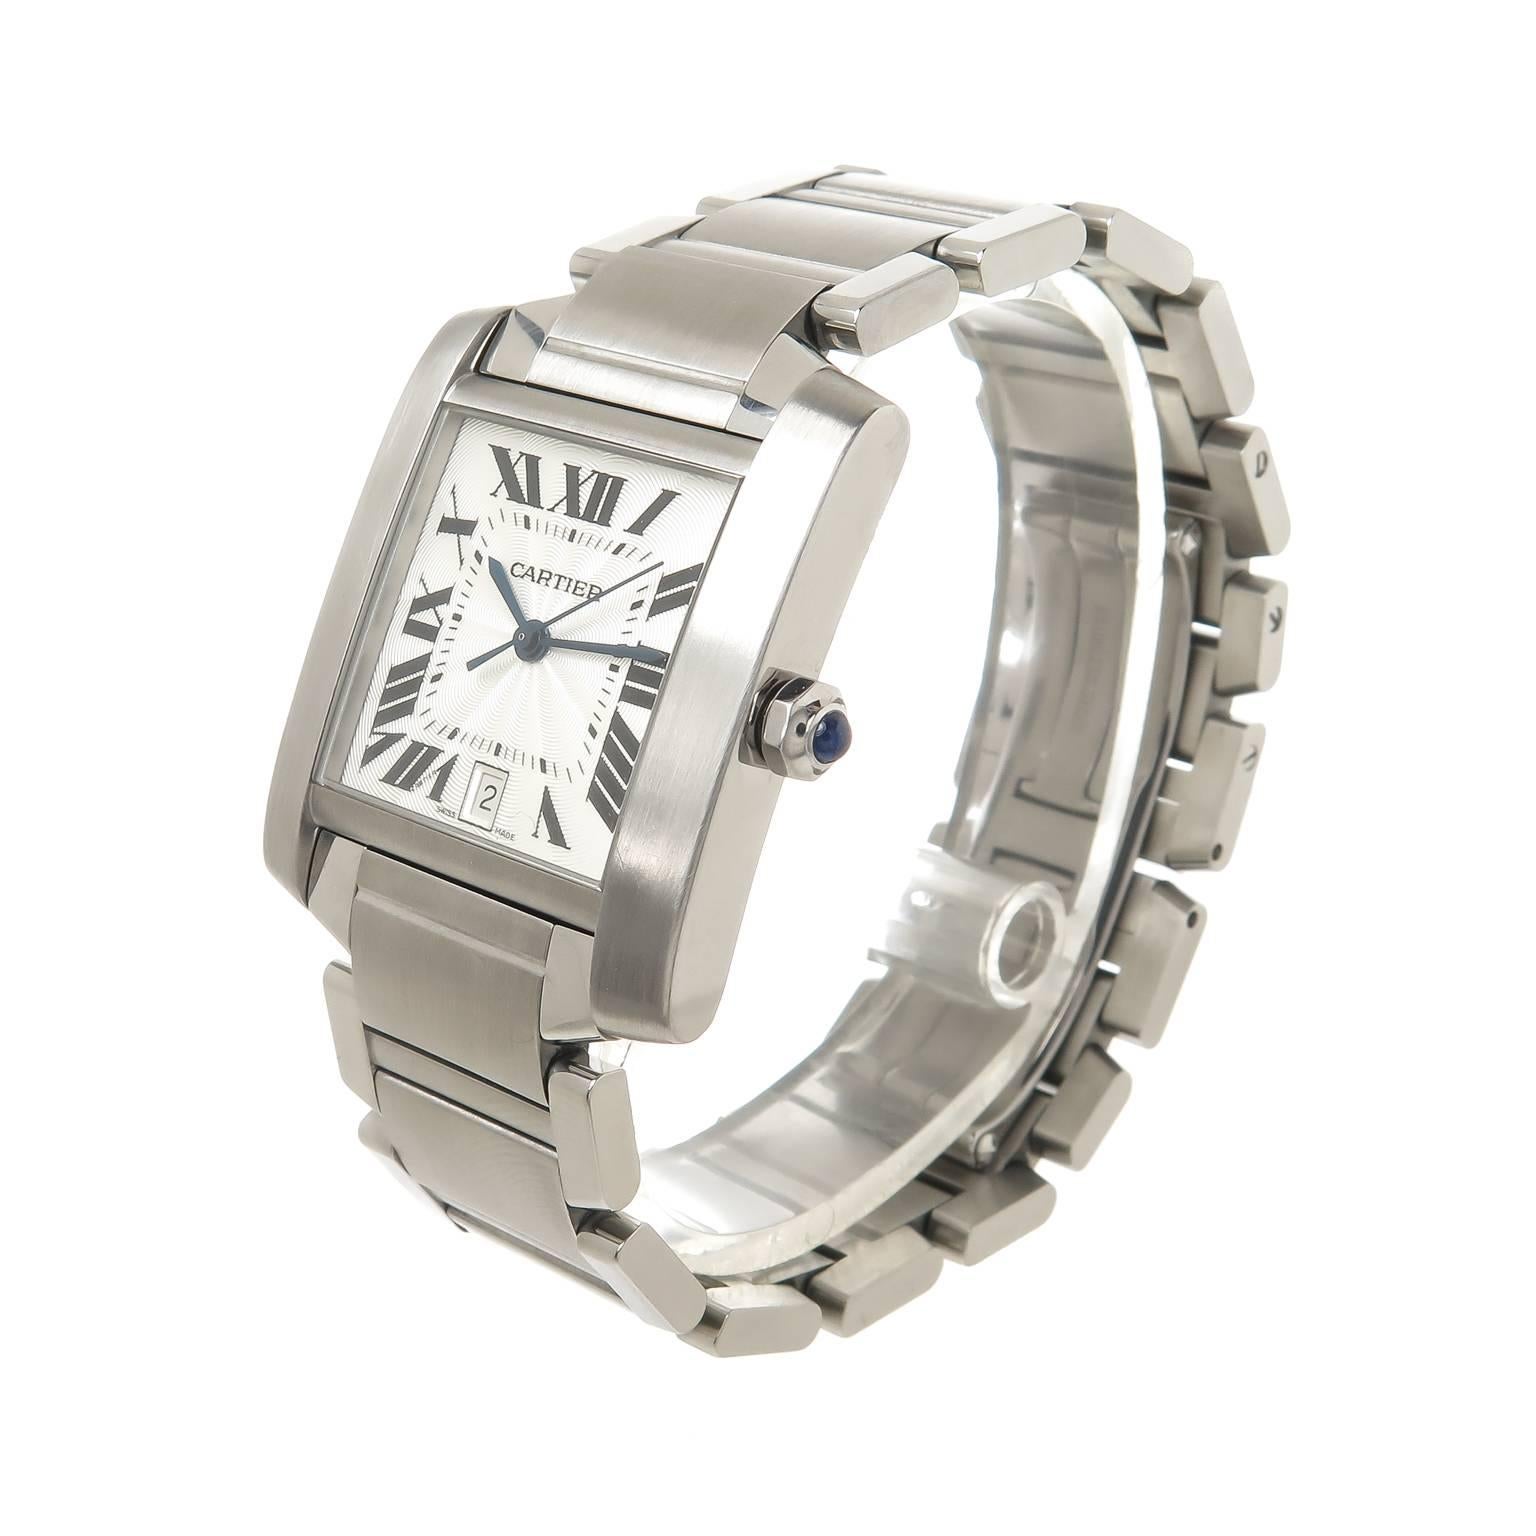 


Circa 2012 Cartier Tank Francaise, 32 X 28 MM Stainless Steel Water resistant Case, Automatic Self winding movement, silver engine turned Dial with Black Roman Numerals sweep seconds hand and calendar window at the 6. 3/4 inch wide steel bracelet